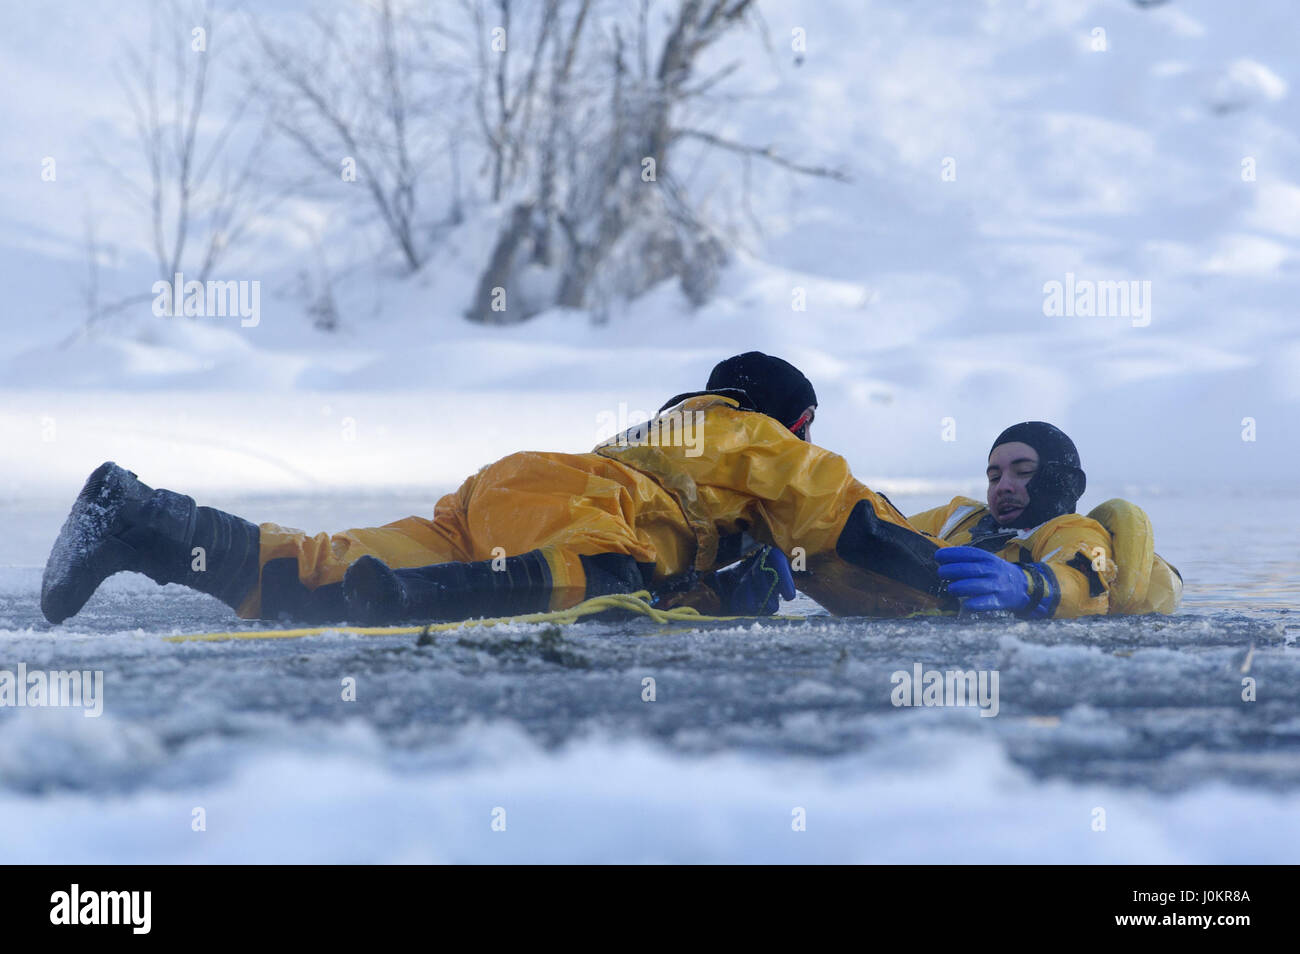 Air Force fire protection specialist, and Airman conduct ice water rescue training Stock Photo